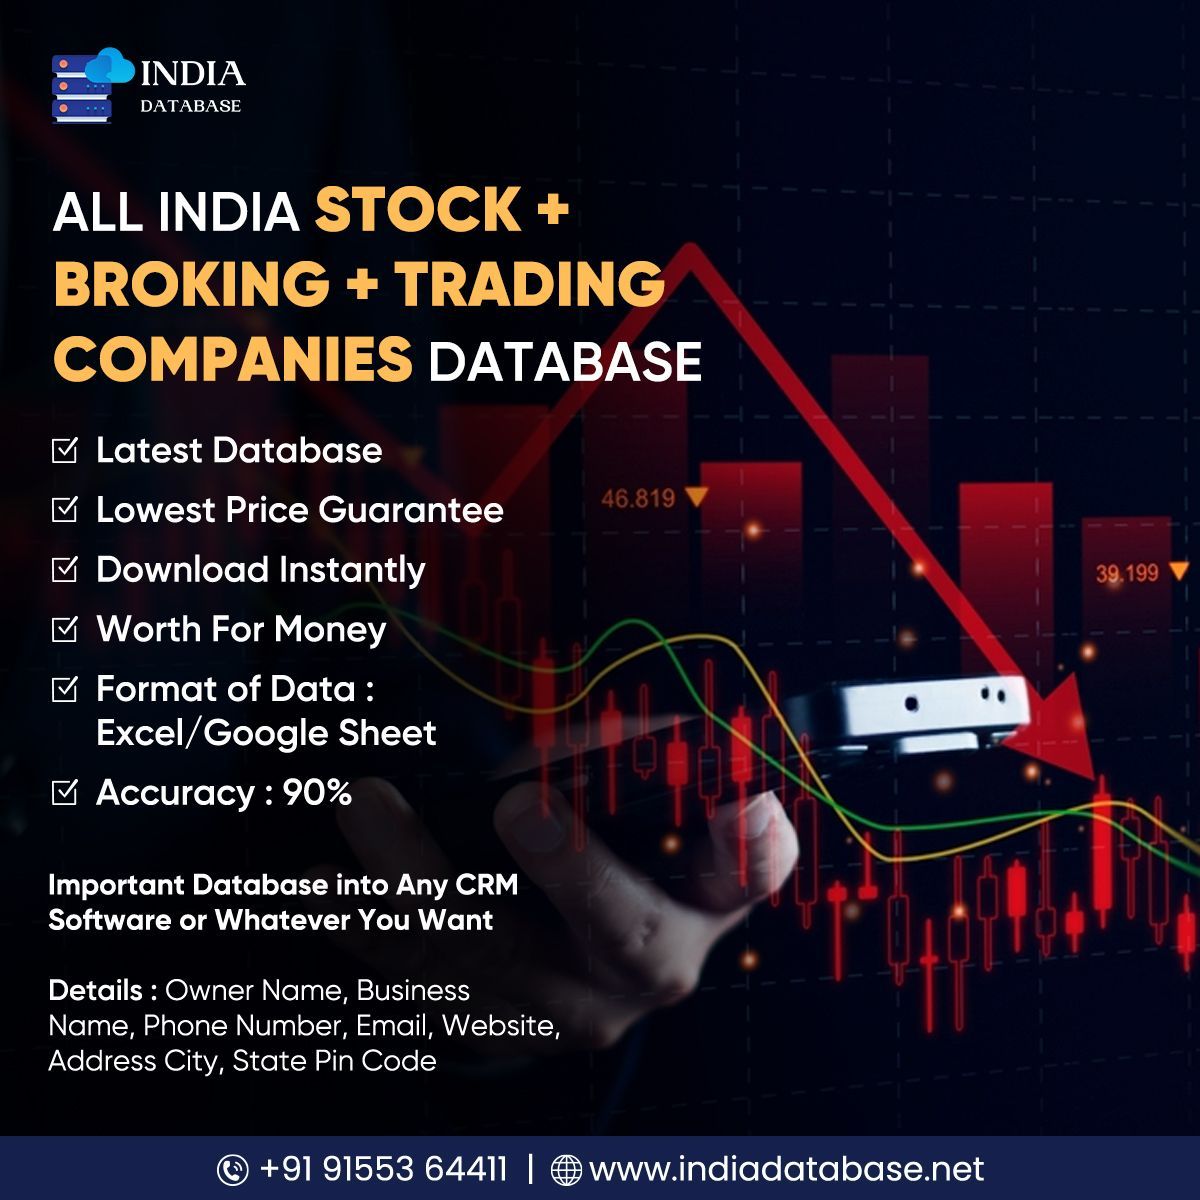 All India Stock + Broking + Trading Companies Database